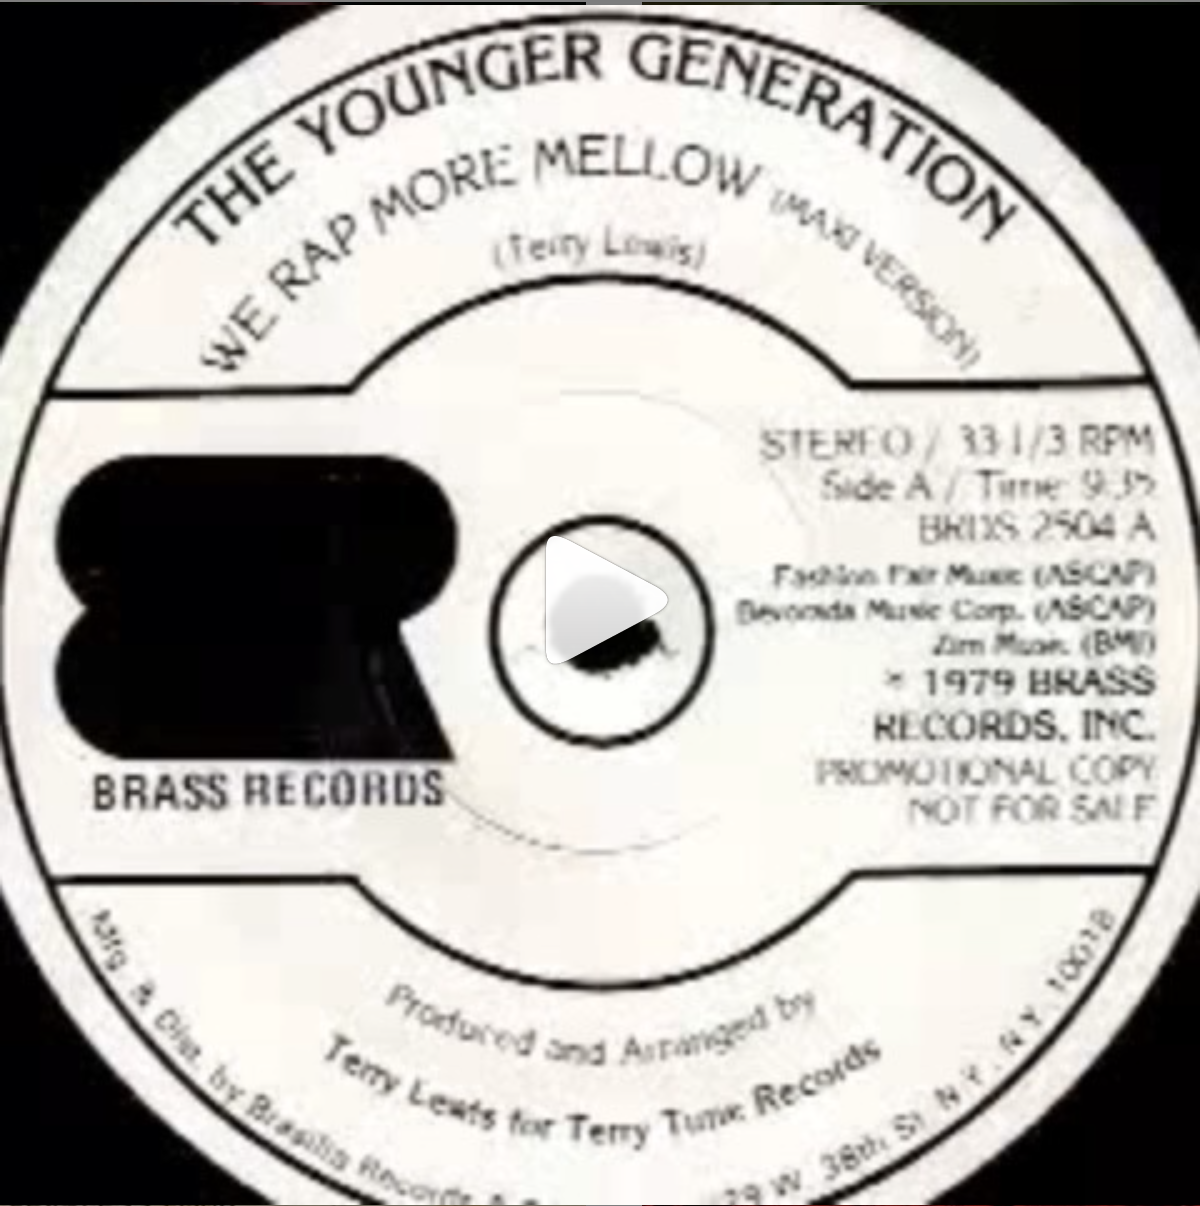 Younger Generation "We rap more mellow" 